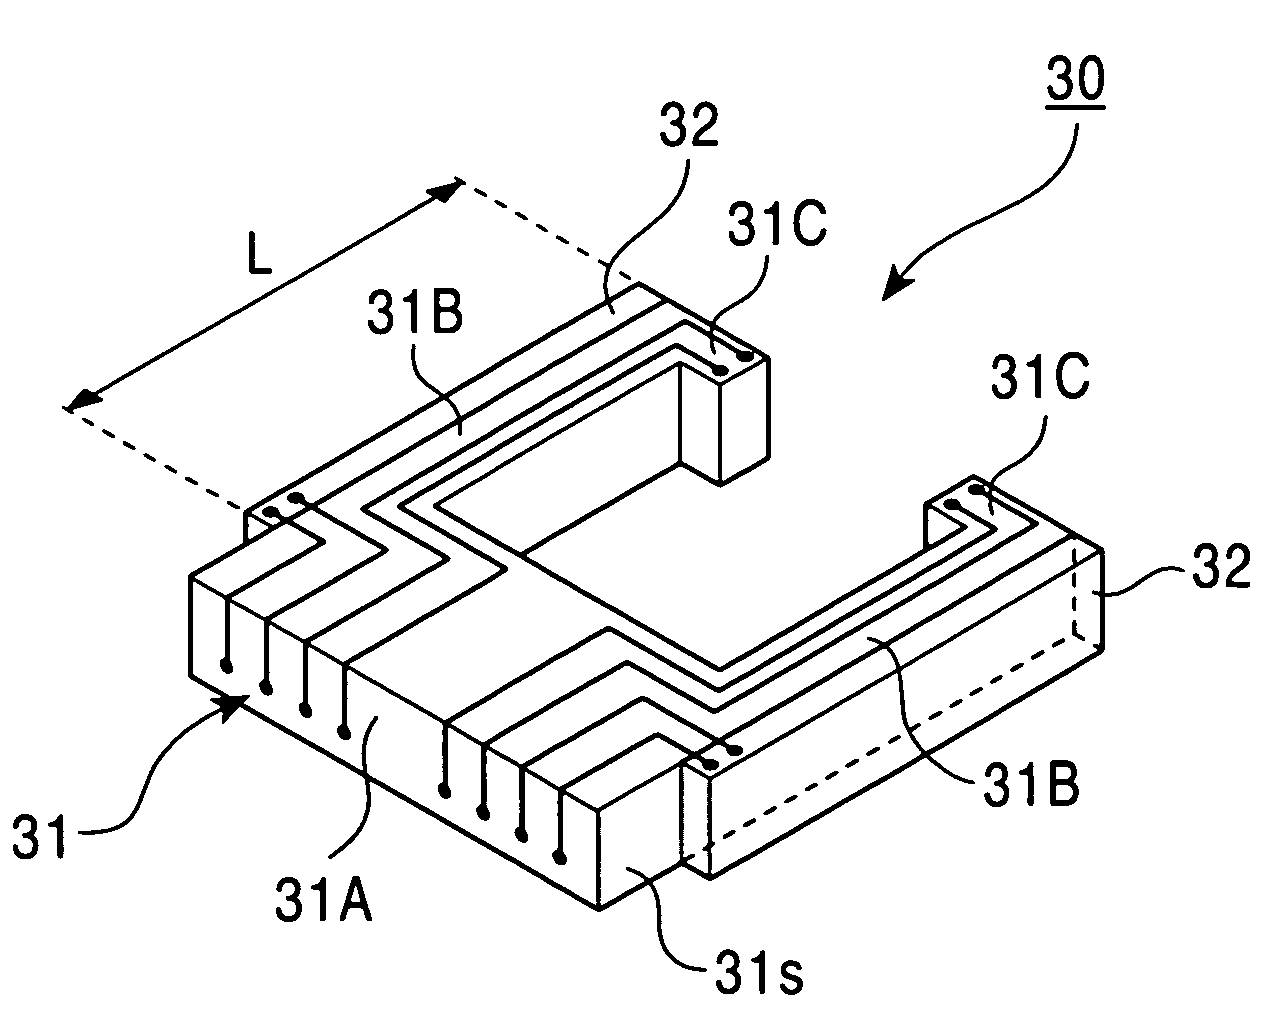 Magnetic head actuator including piezoelectric elements fixed to the arms of a fired glass-ceramic substrate